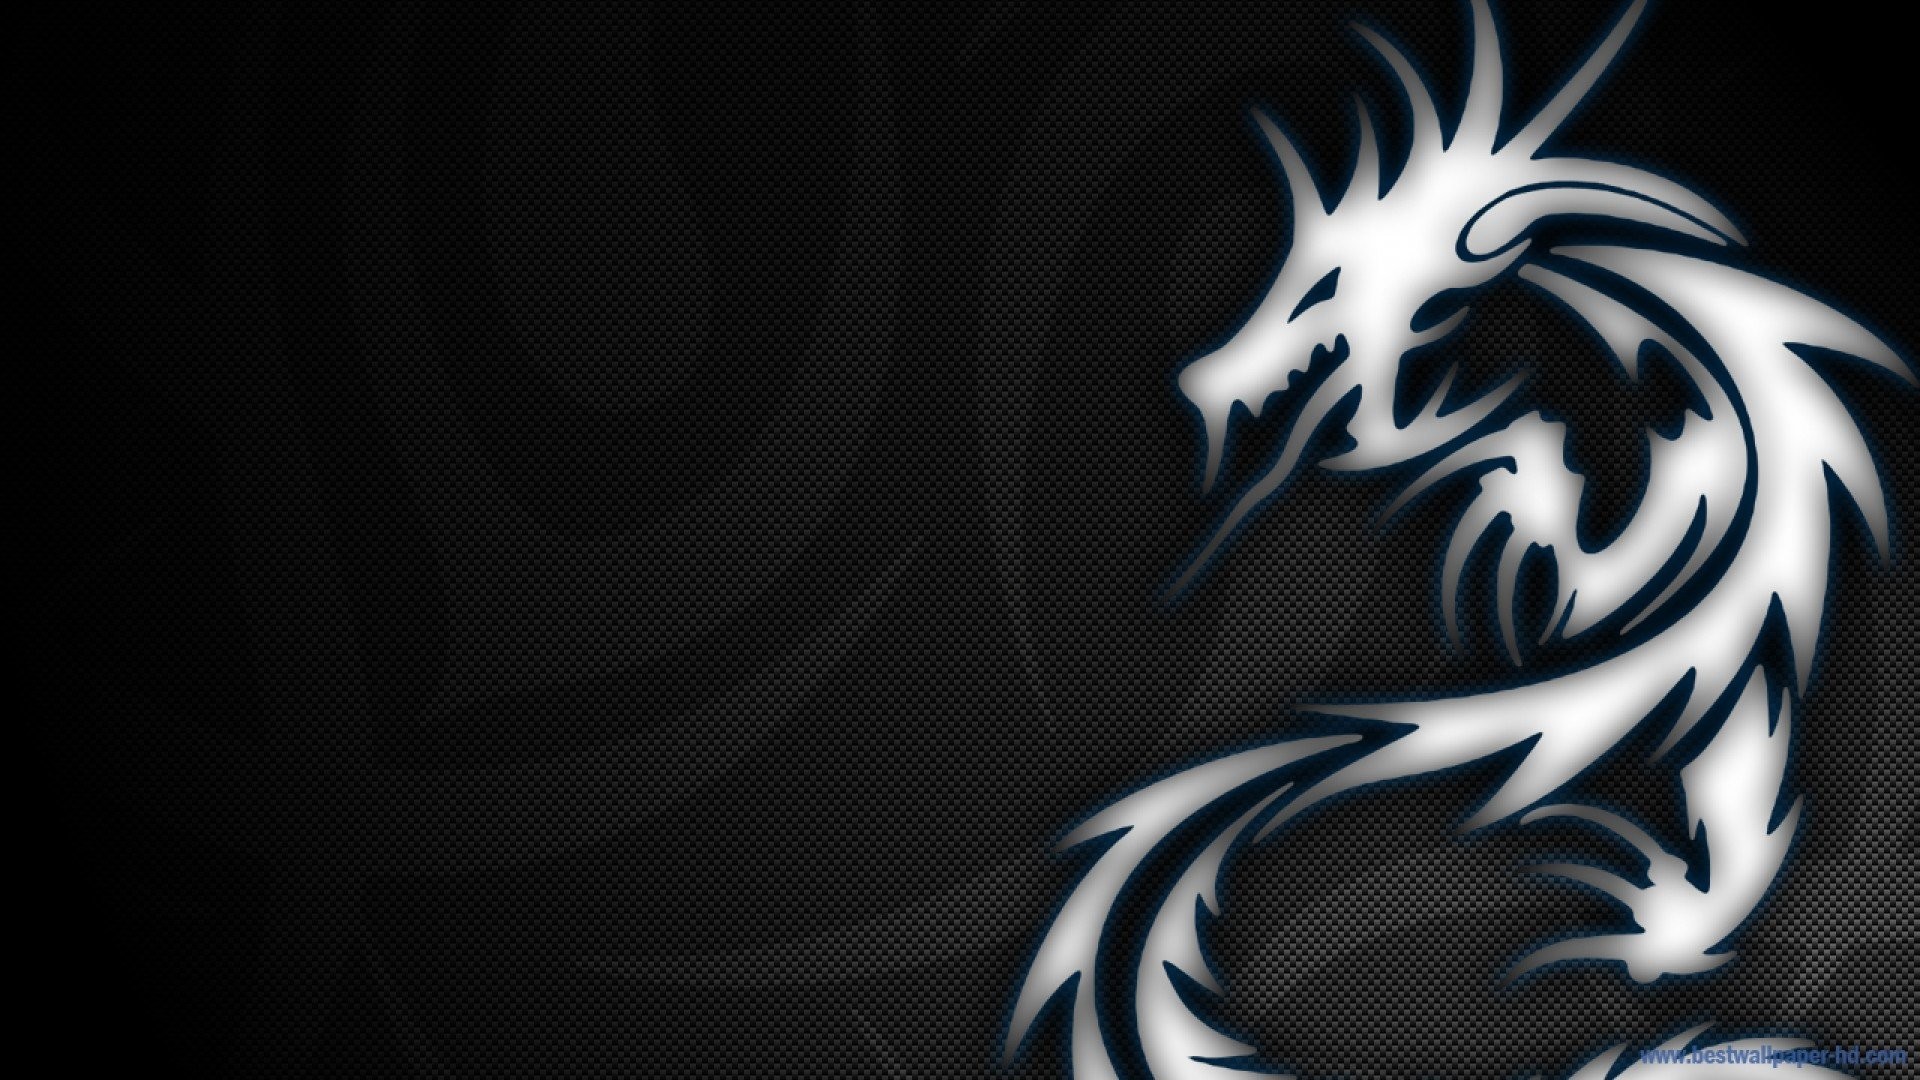 Abstract Dragon wallpaper background